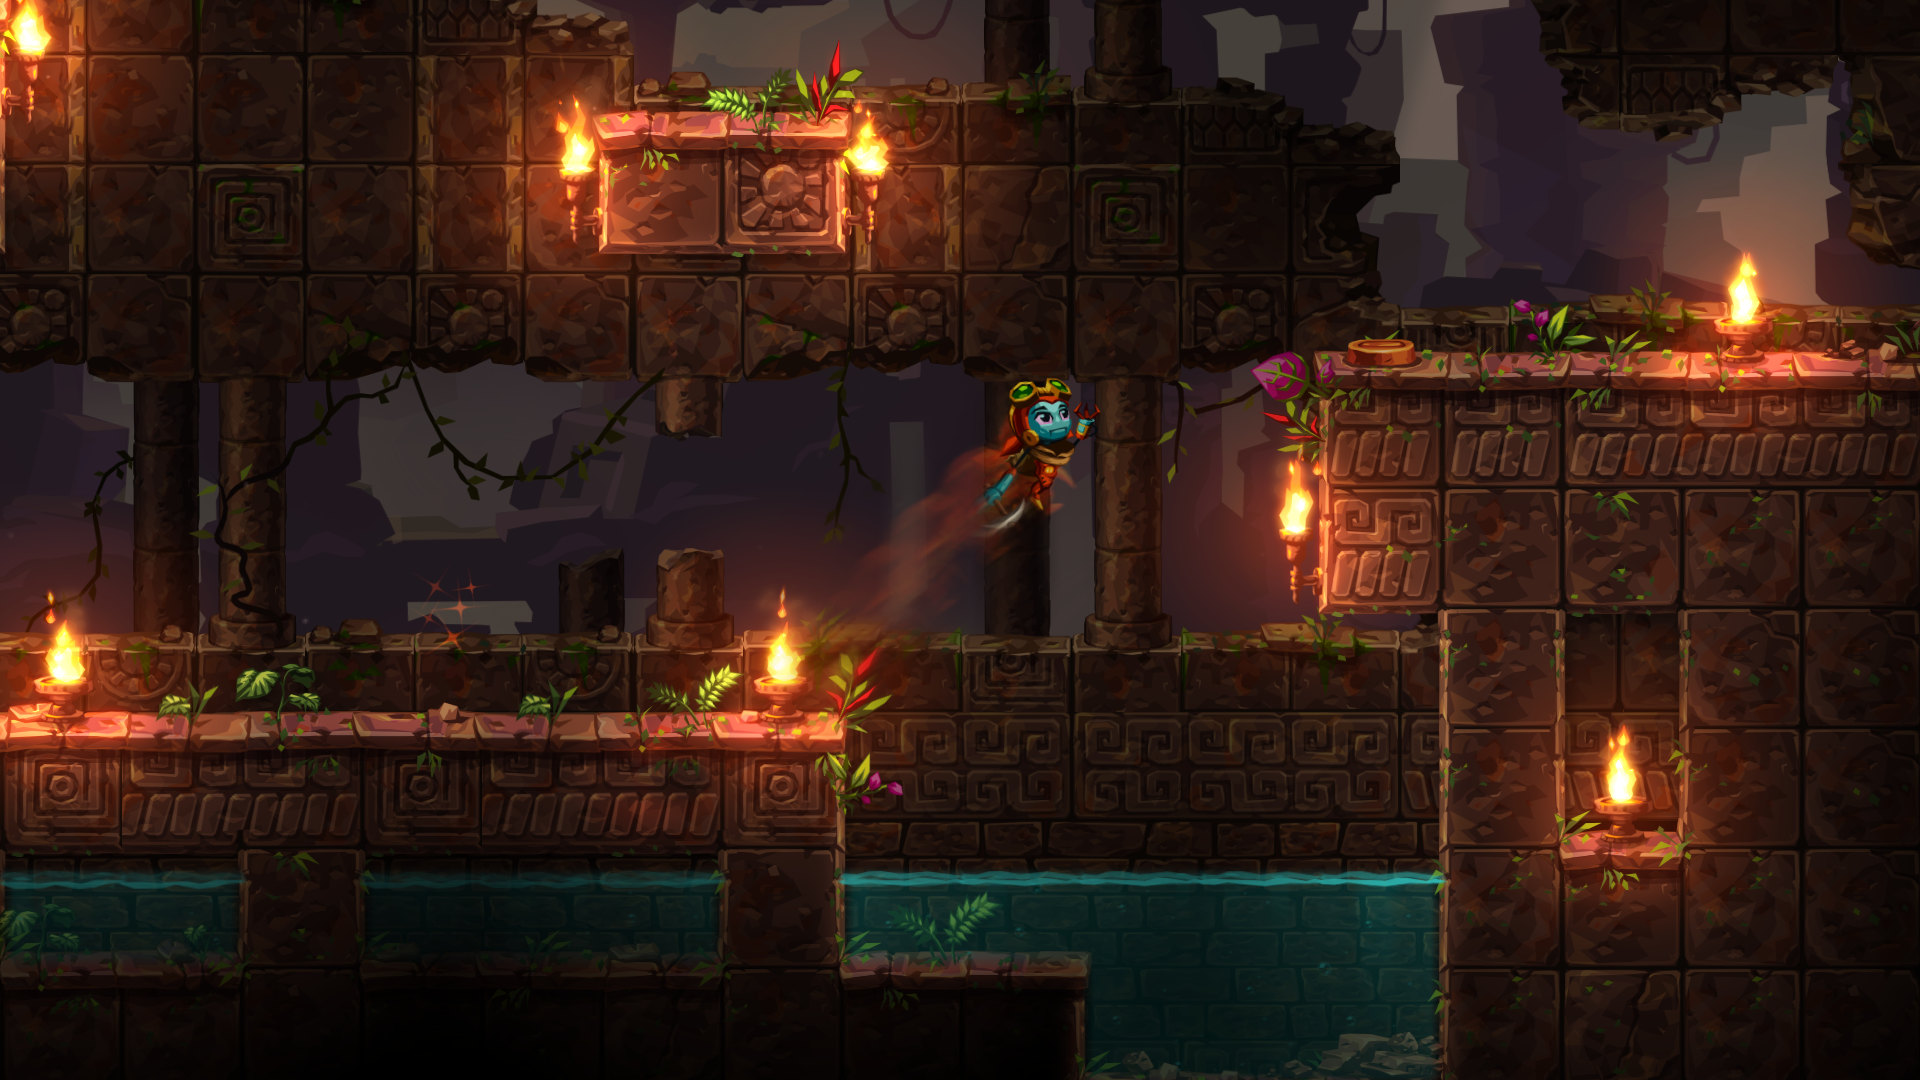 HD desktop wallpaper from SteamWorld Dig 2 featuring a character navigating through underground ruins with torches and water.